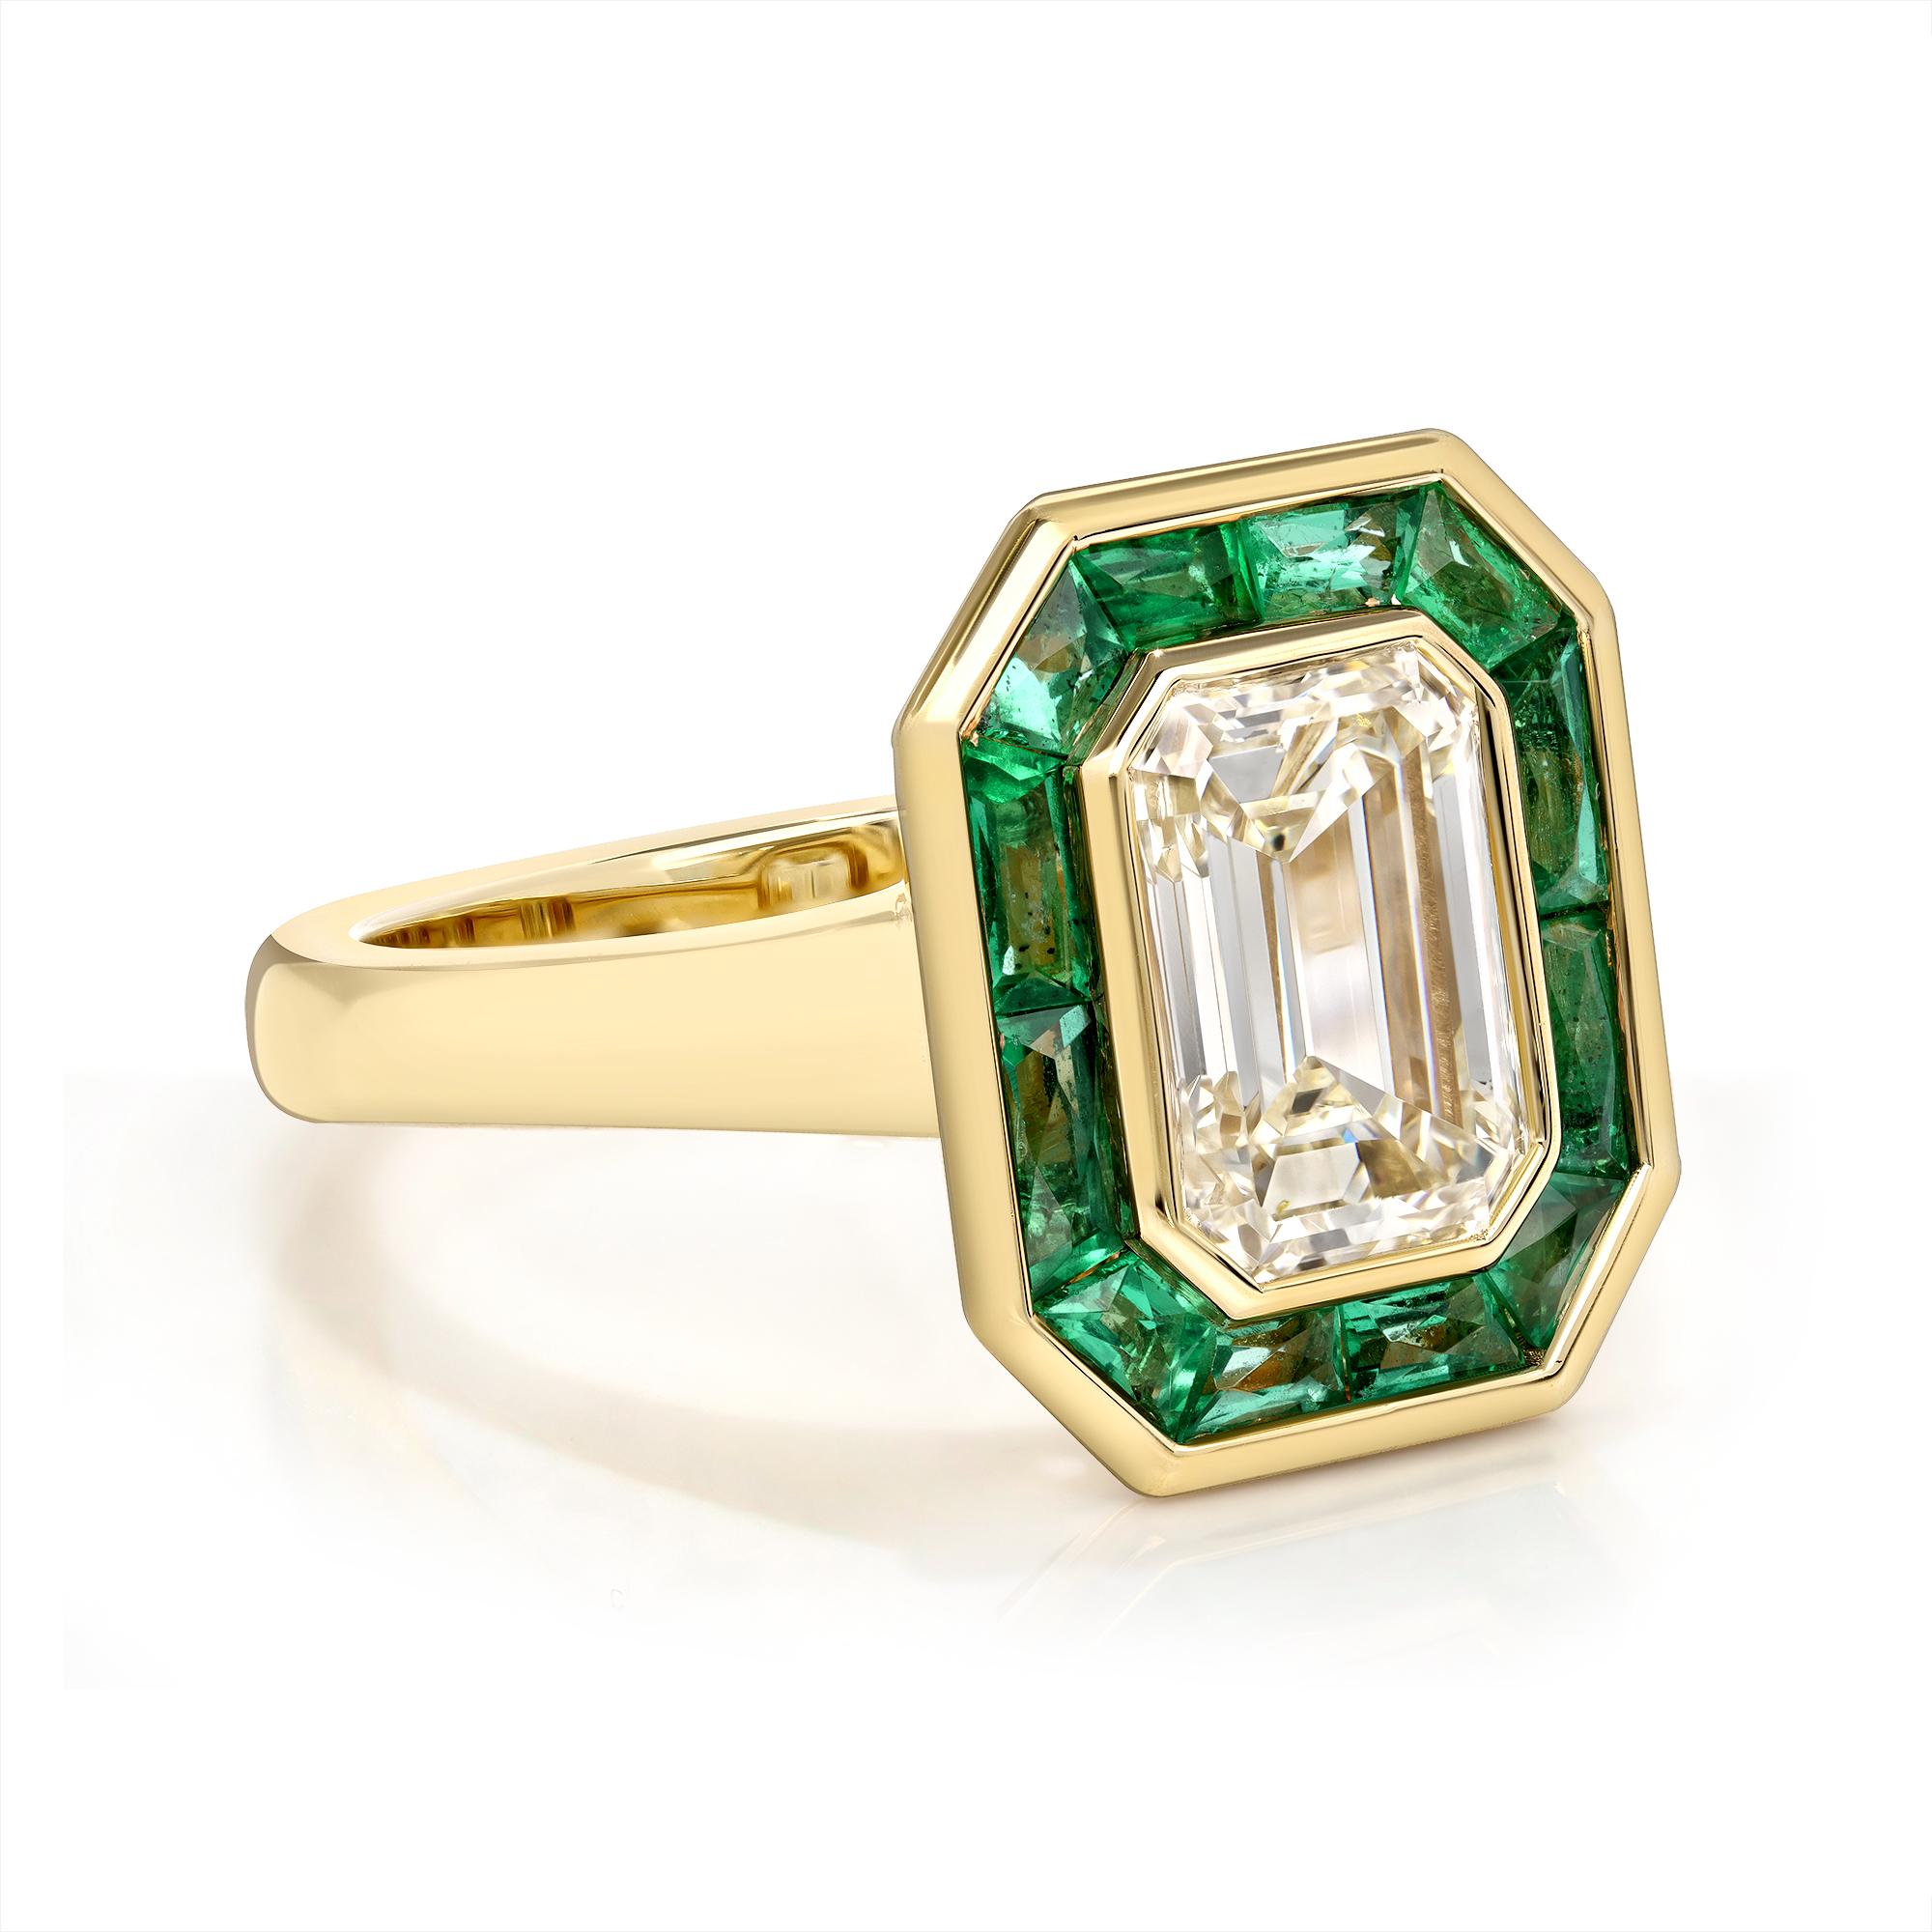 2.11ct N/VS1 GIA certified emerald cut diamond with 0.92ctw French cut emeralds bezel set in a handcrafted 18K yellow gold mounting.